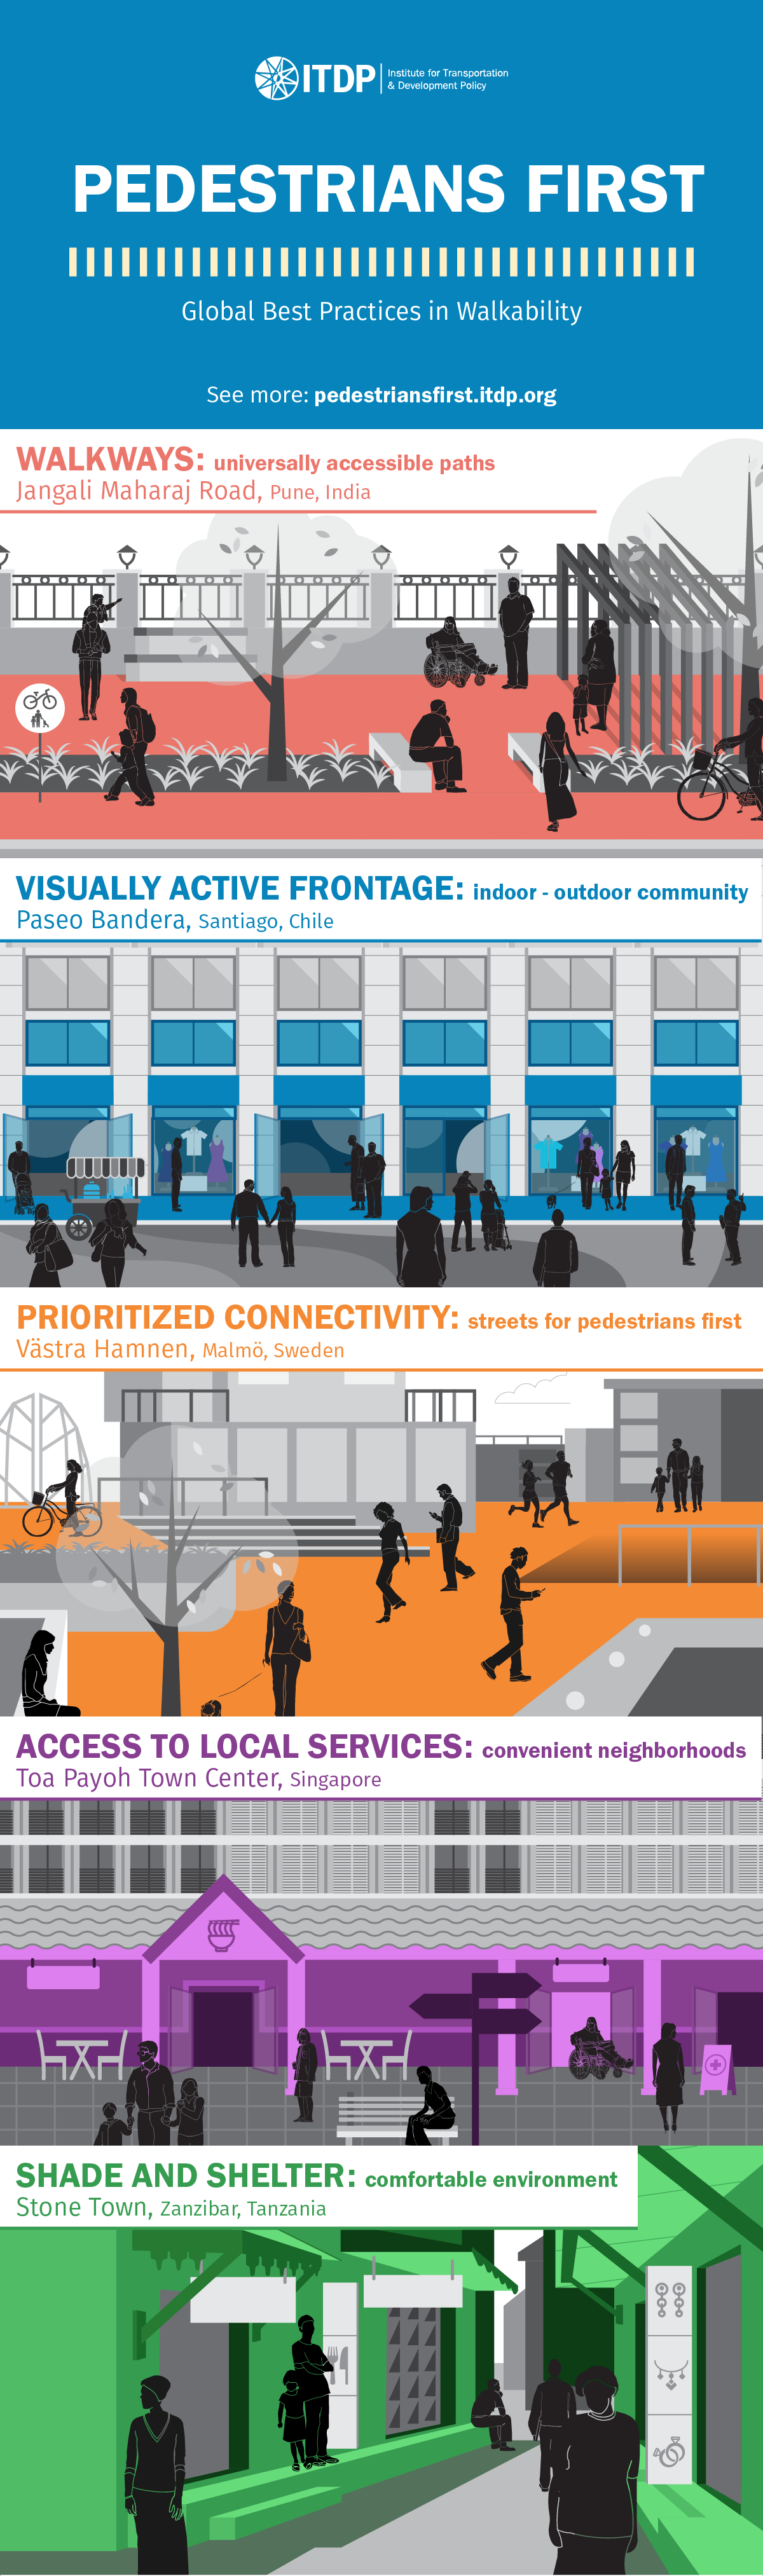 Pedestrians First Global Best Practices in Walkability Infographic